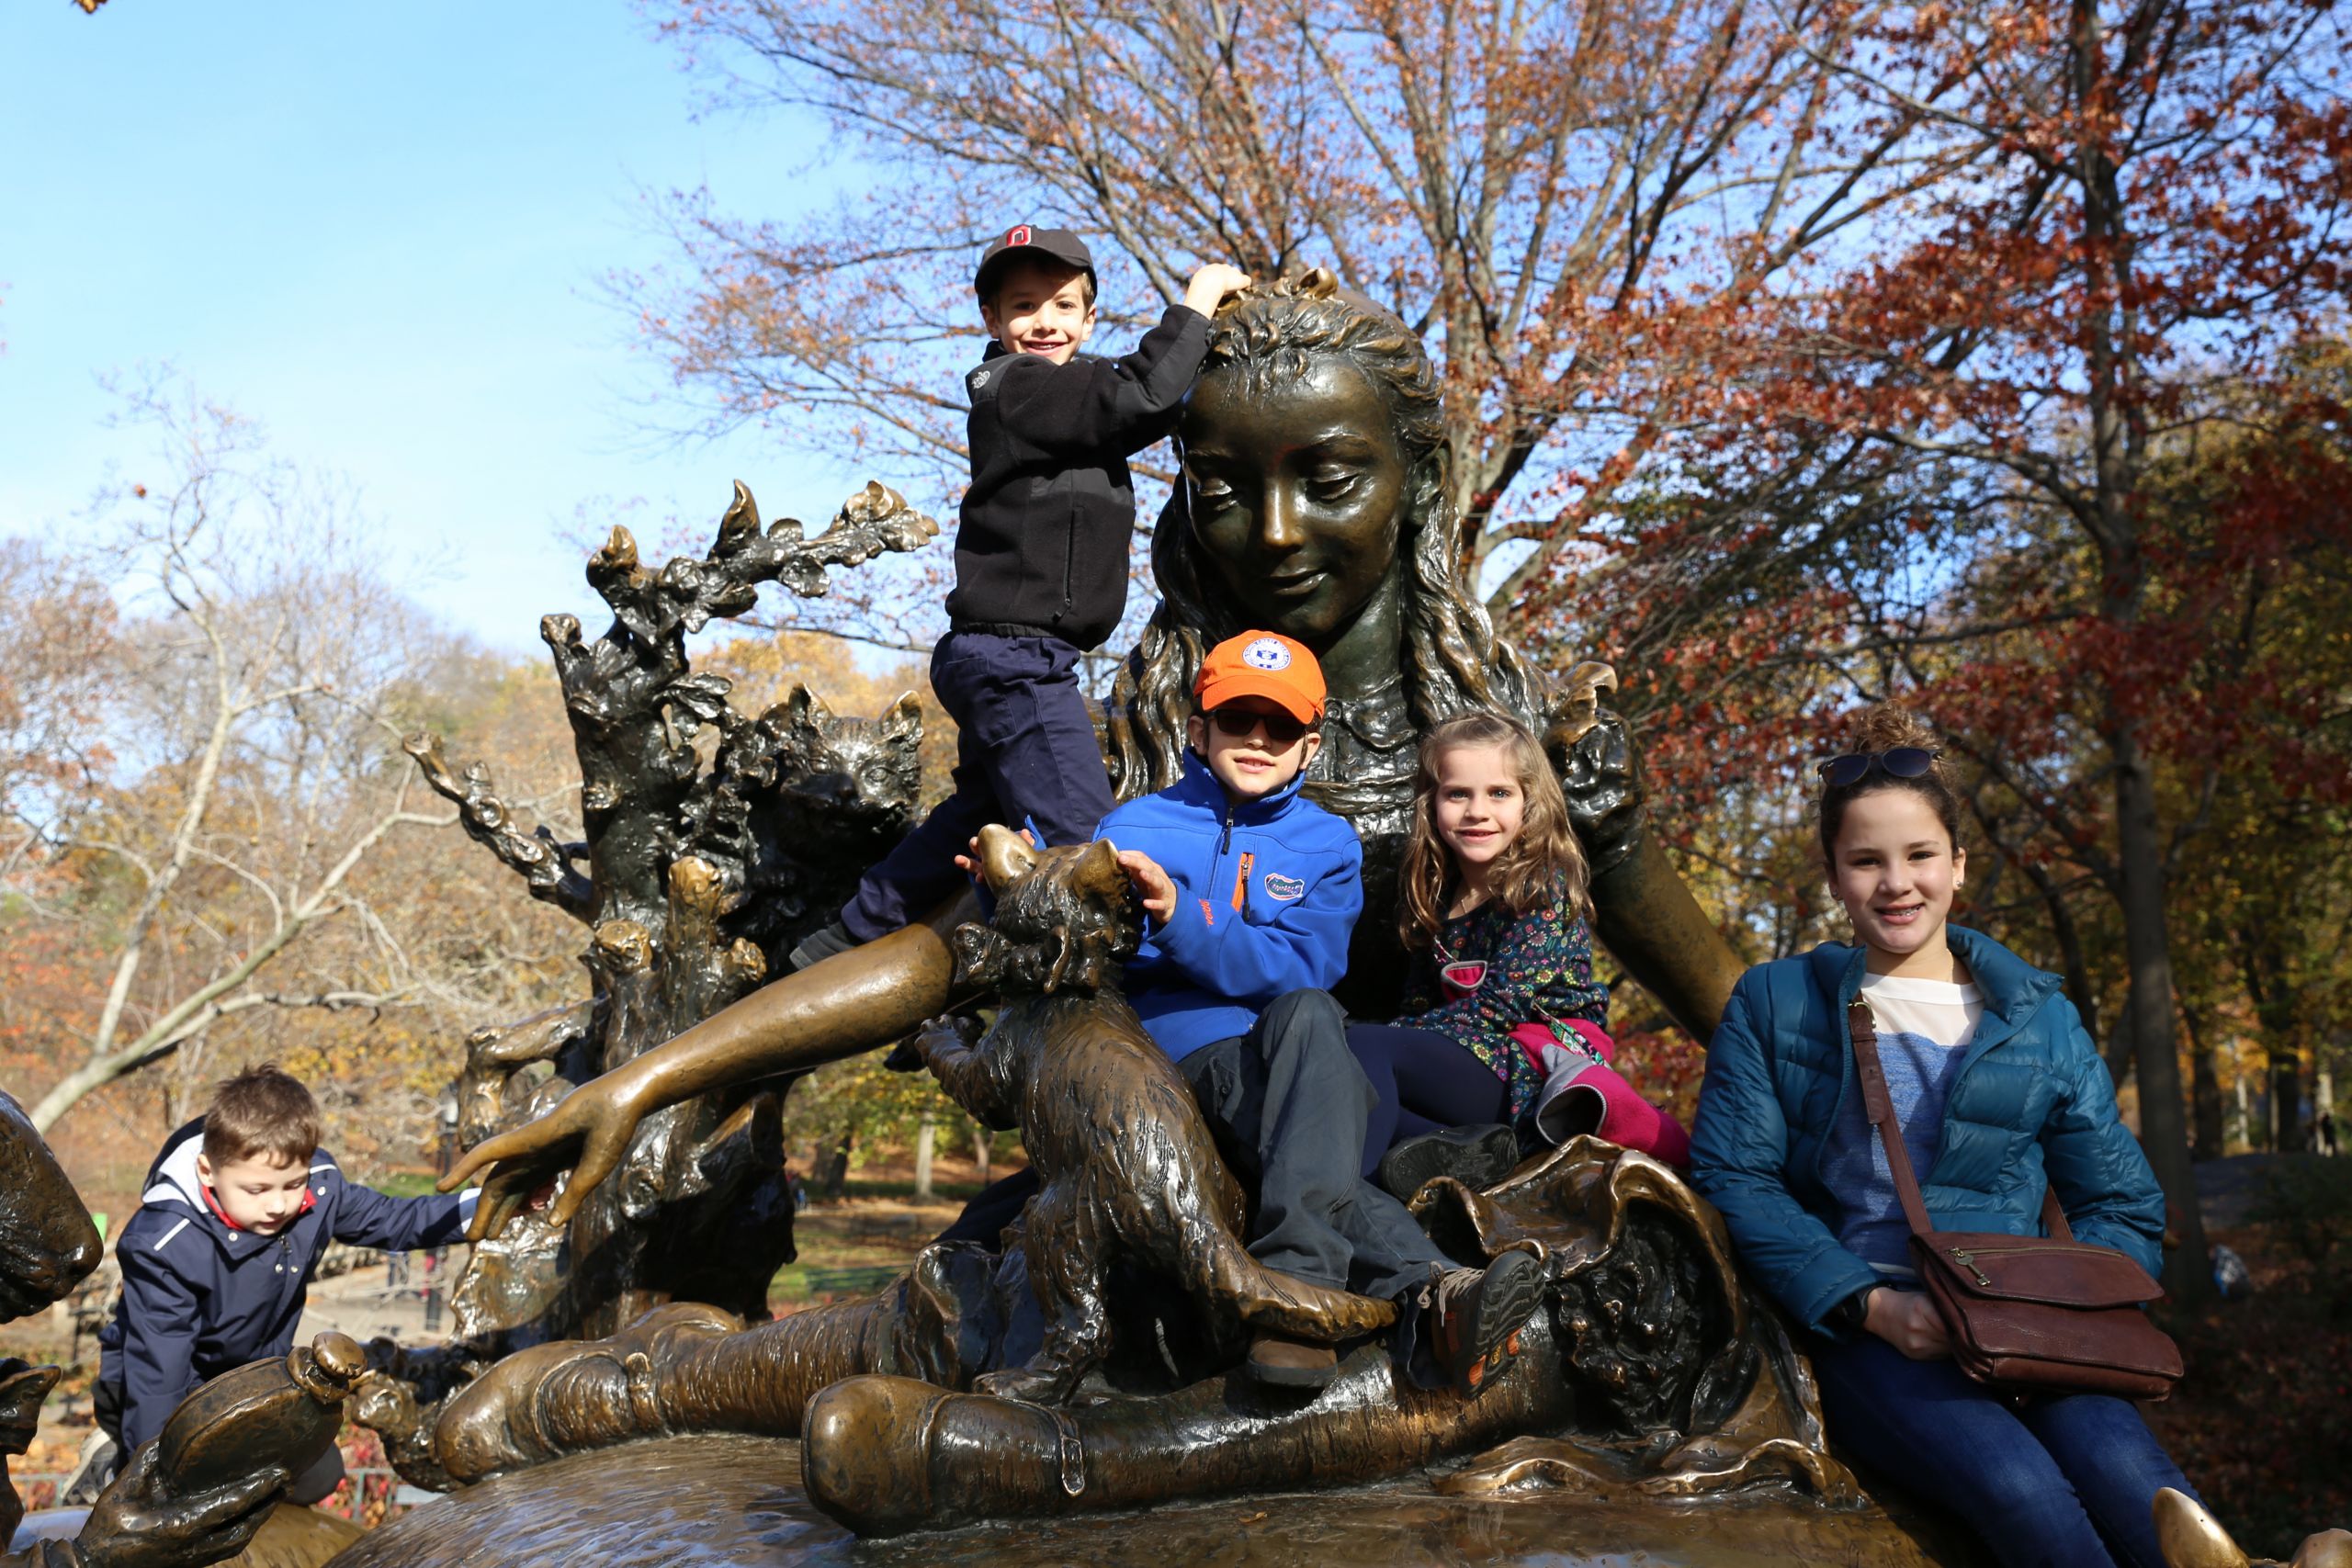 Thanksgiving Vacation Ideas For Families
 New York Snapshots Thanksgiving Family Vacation – Ruth E